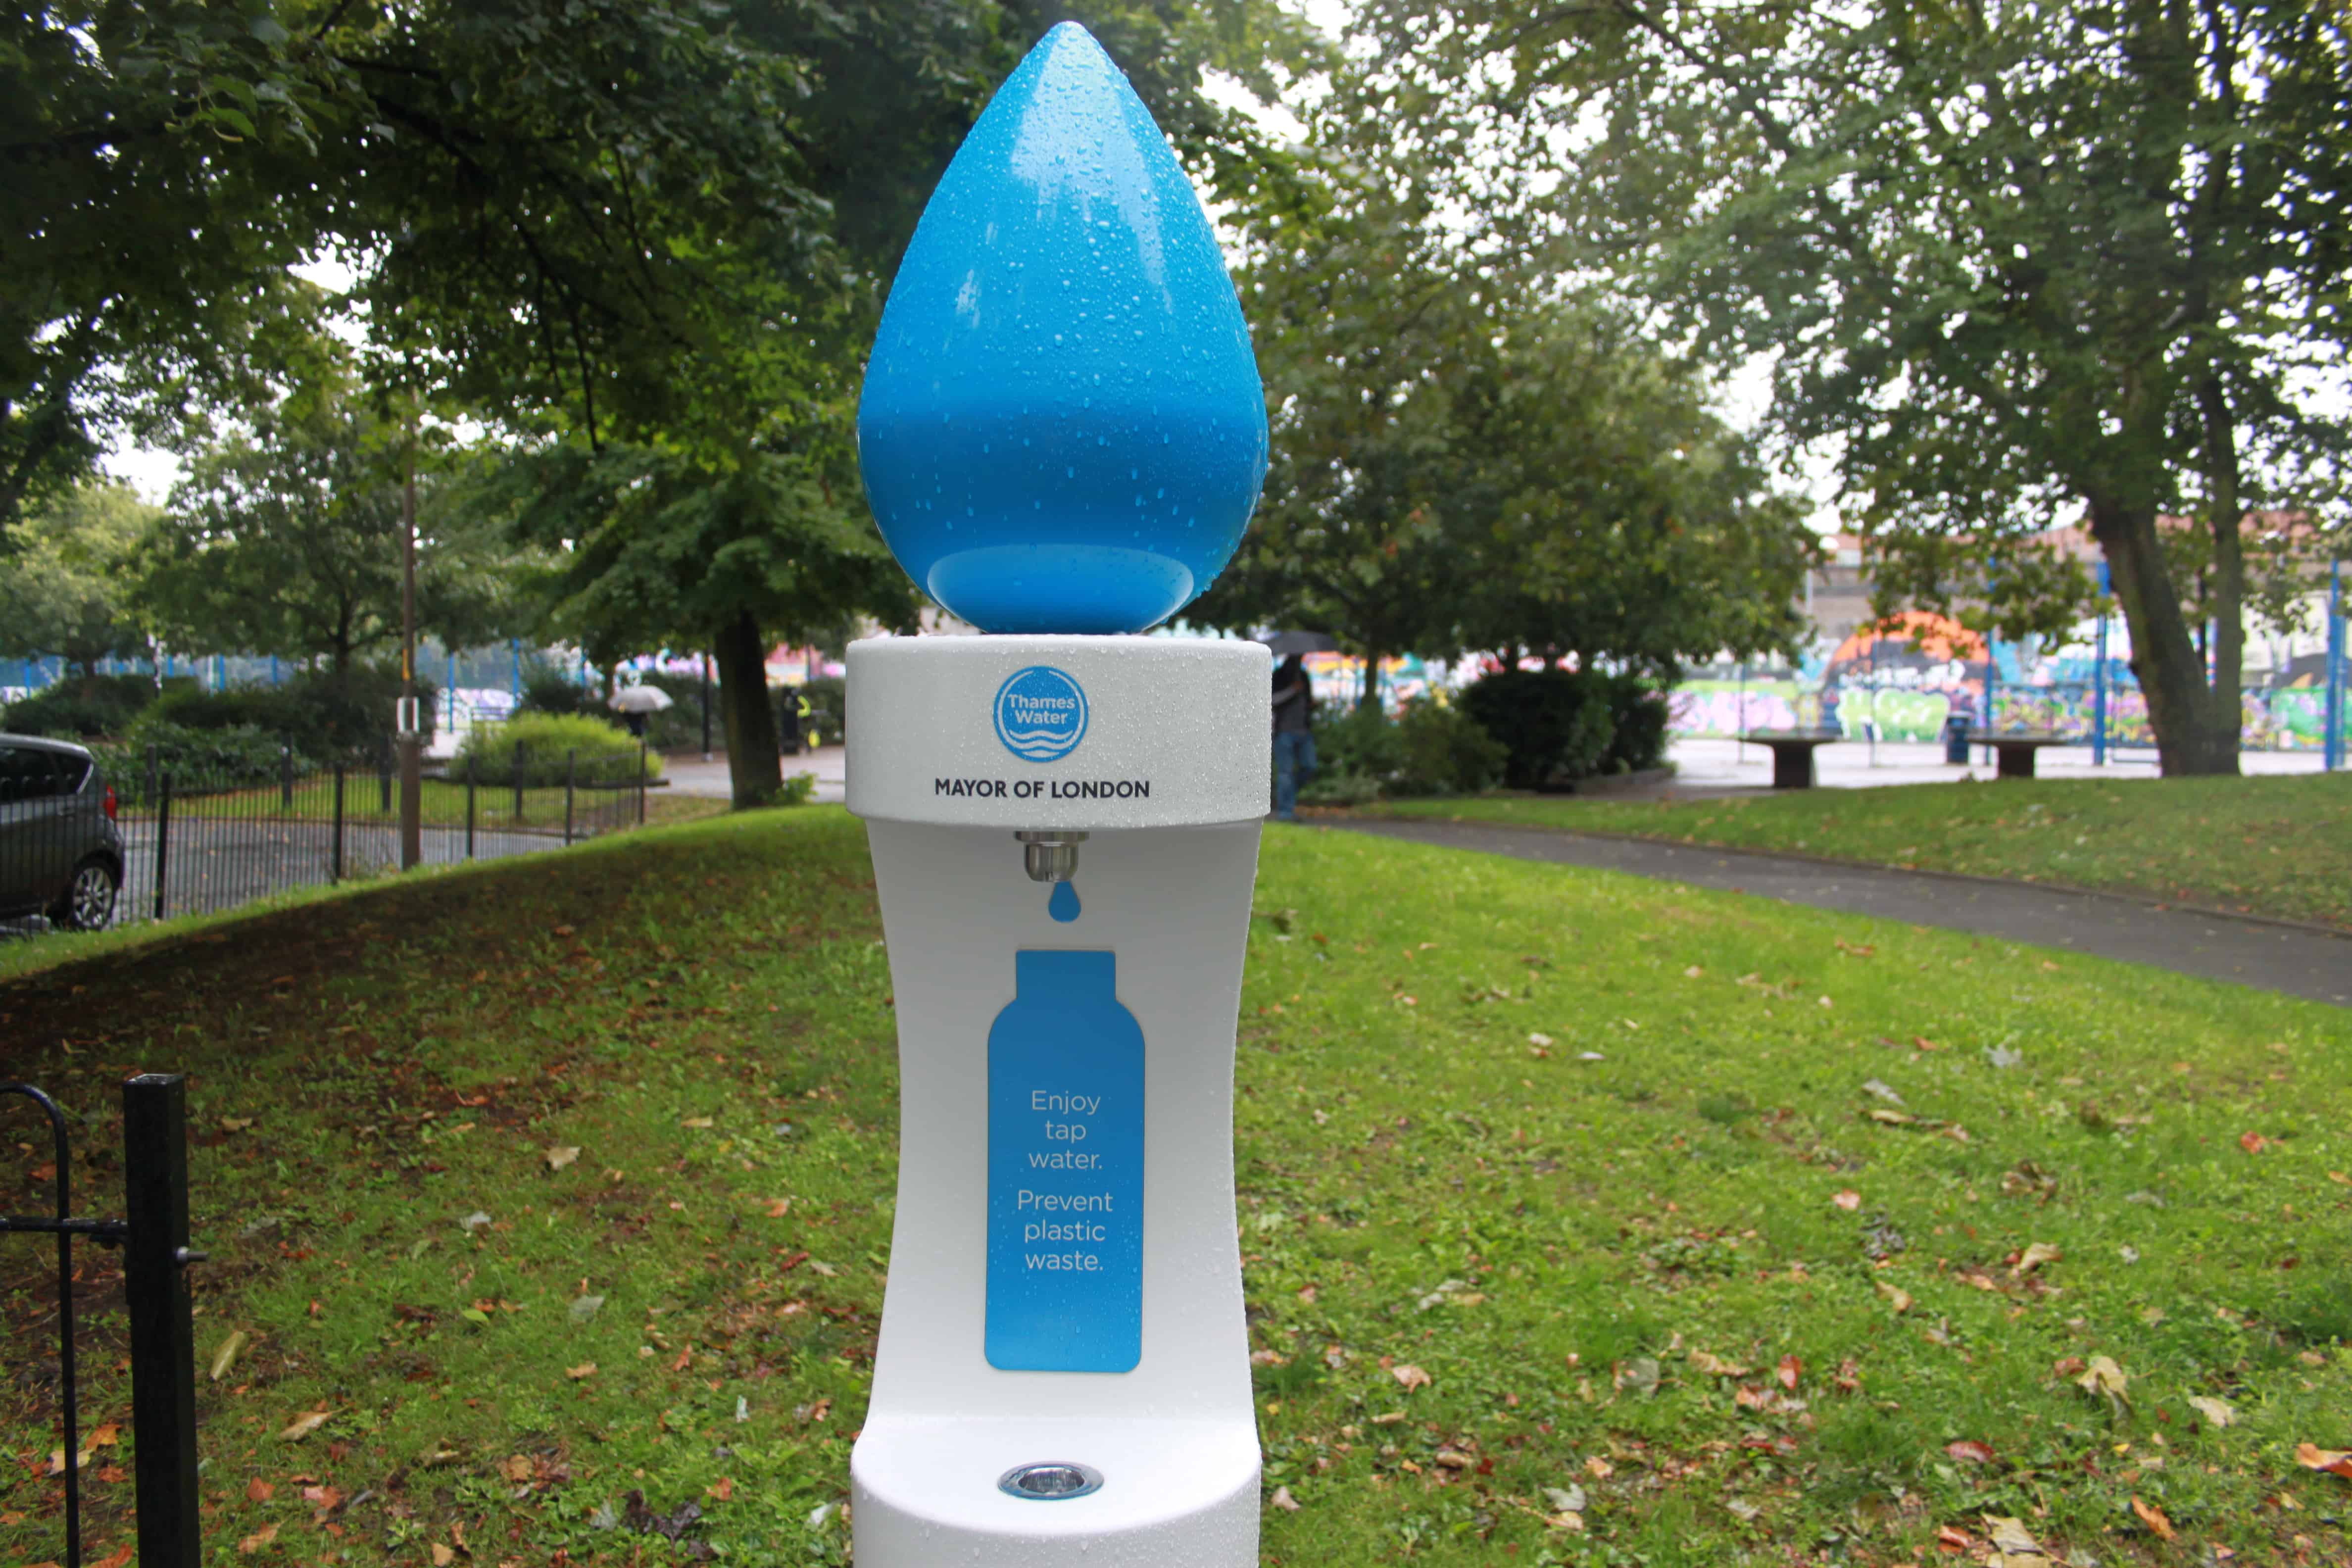 Brimmington Park, just off the Old Kent Road, is one of the parks where you can fill up your water bottle for free